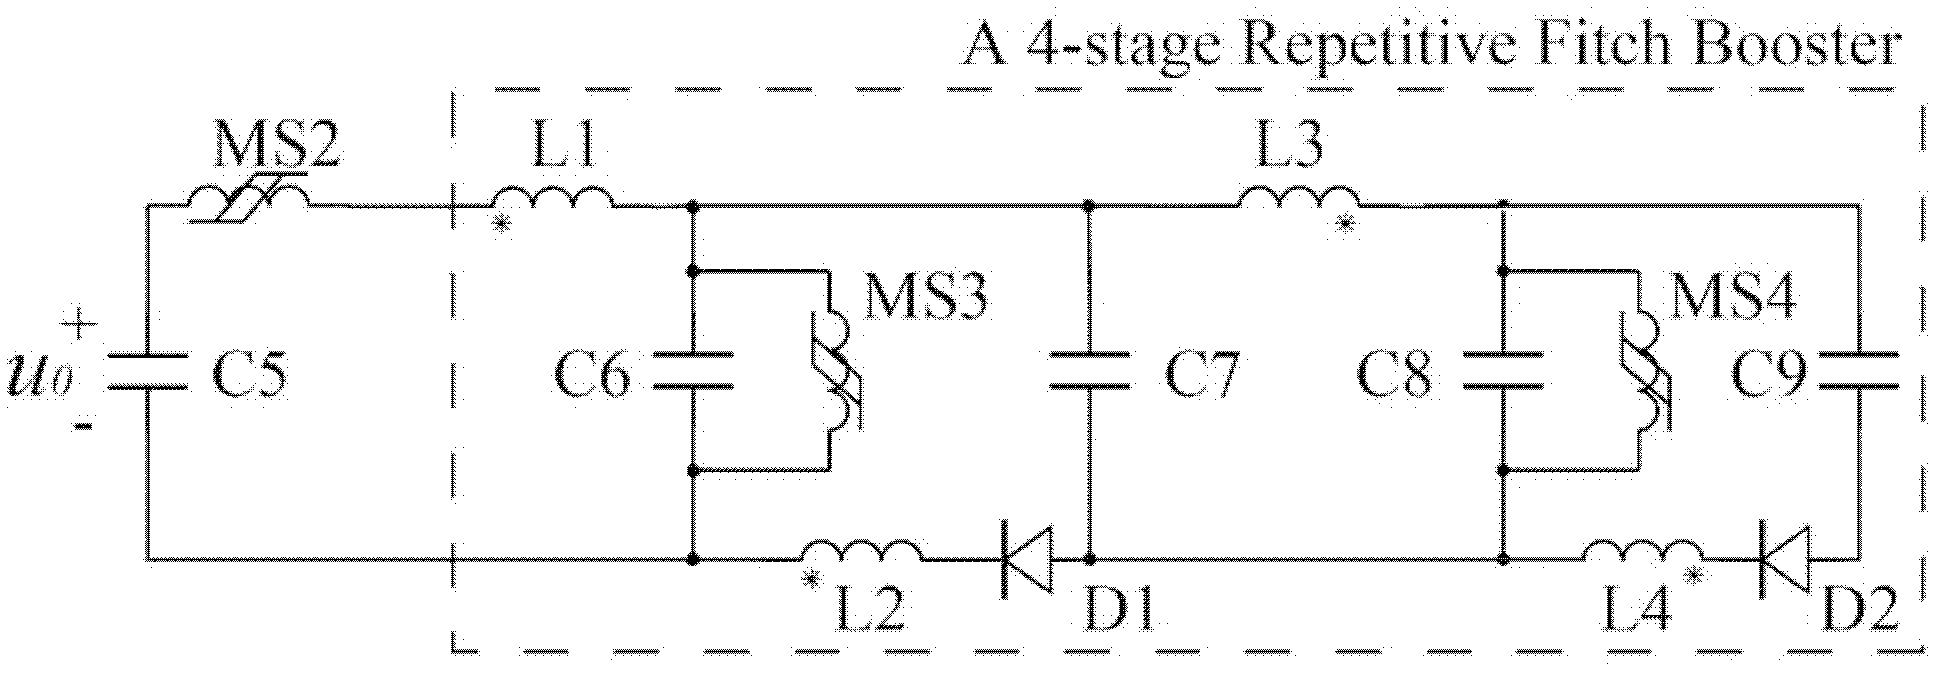 Repetition frequency compact pulse multiplier based on Fitch circuit